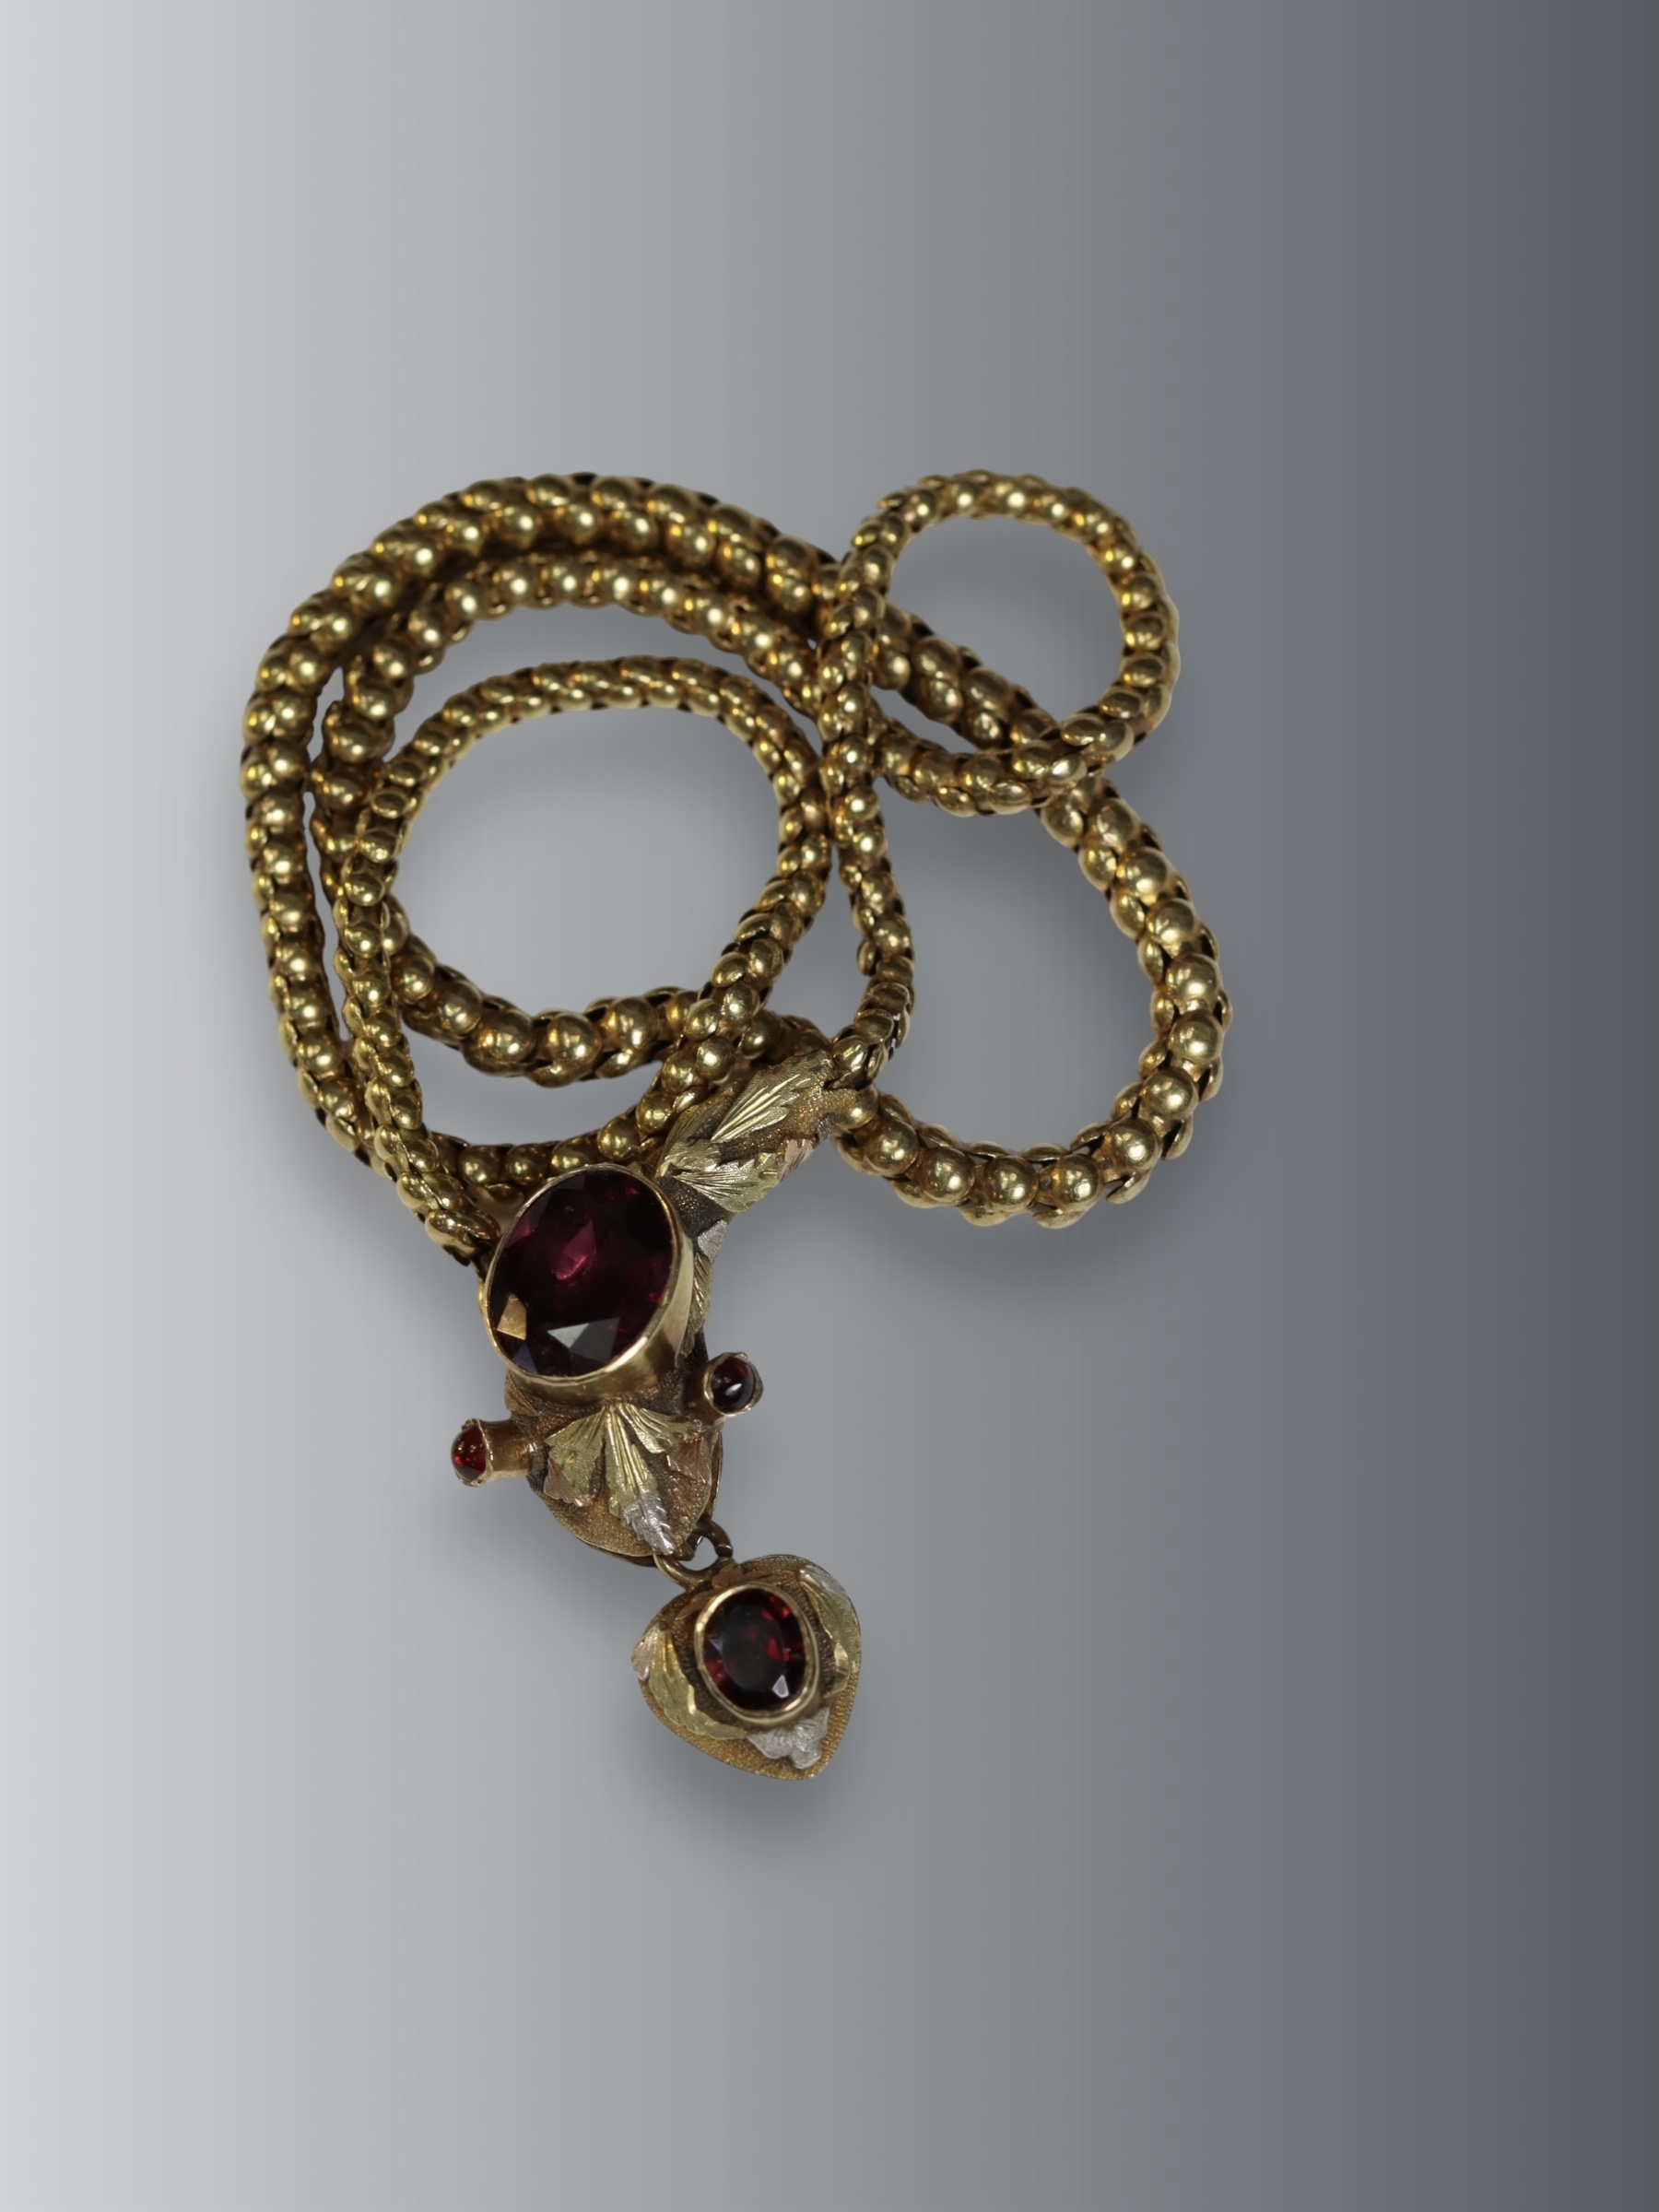 An Antique Cabochon Garnet and Gold Snake Necklace, circa 1860, the head formed from a cabochon